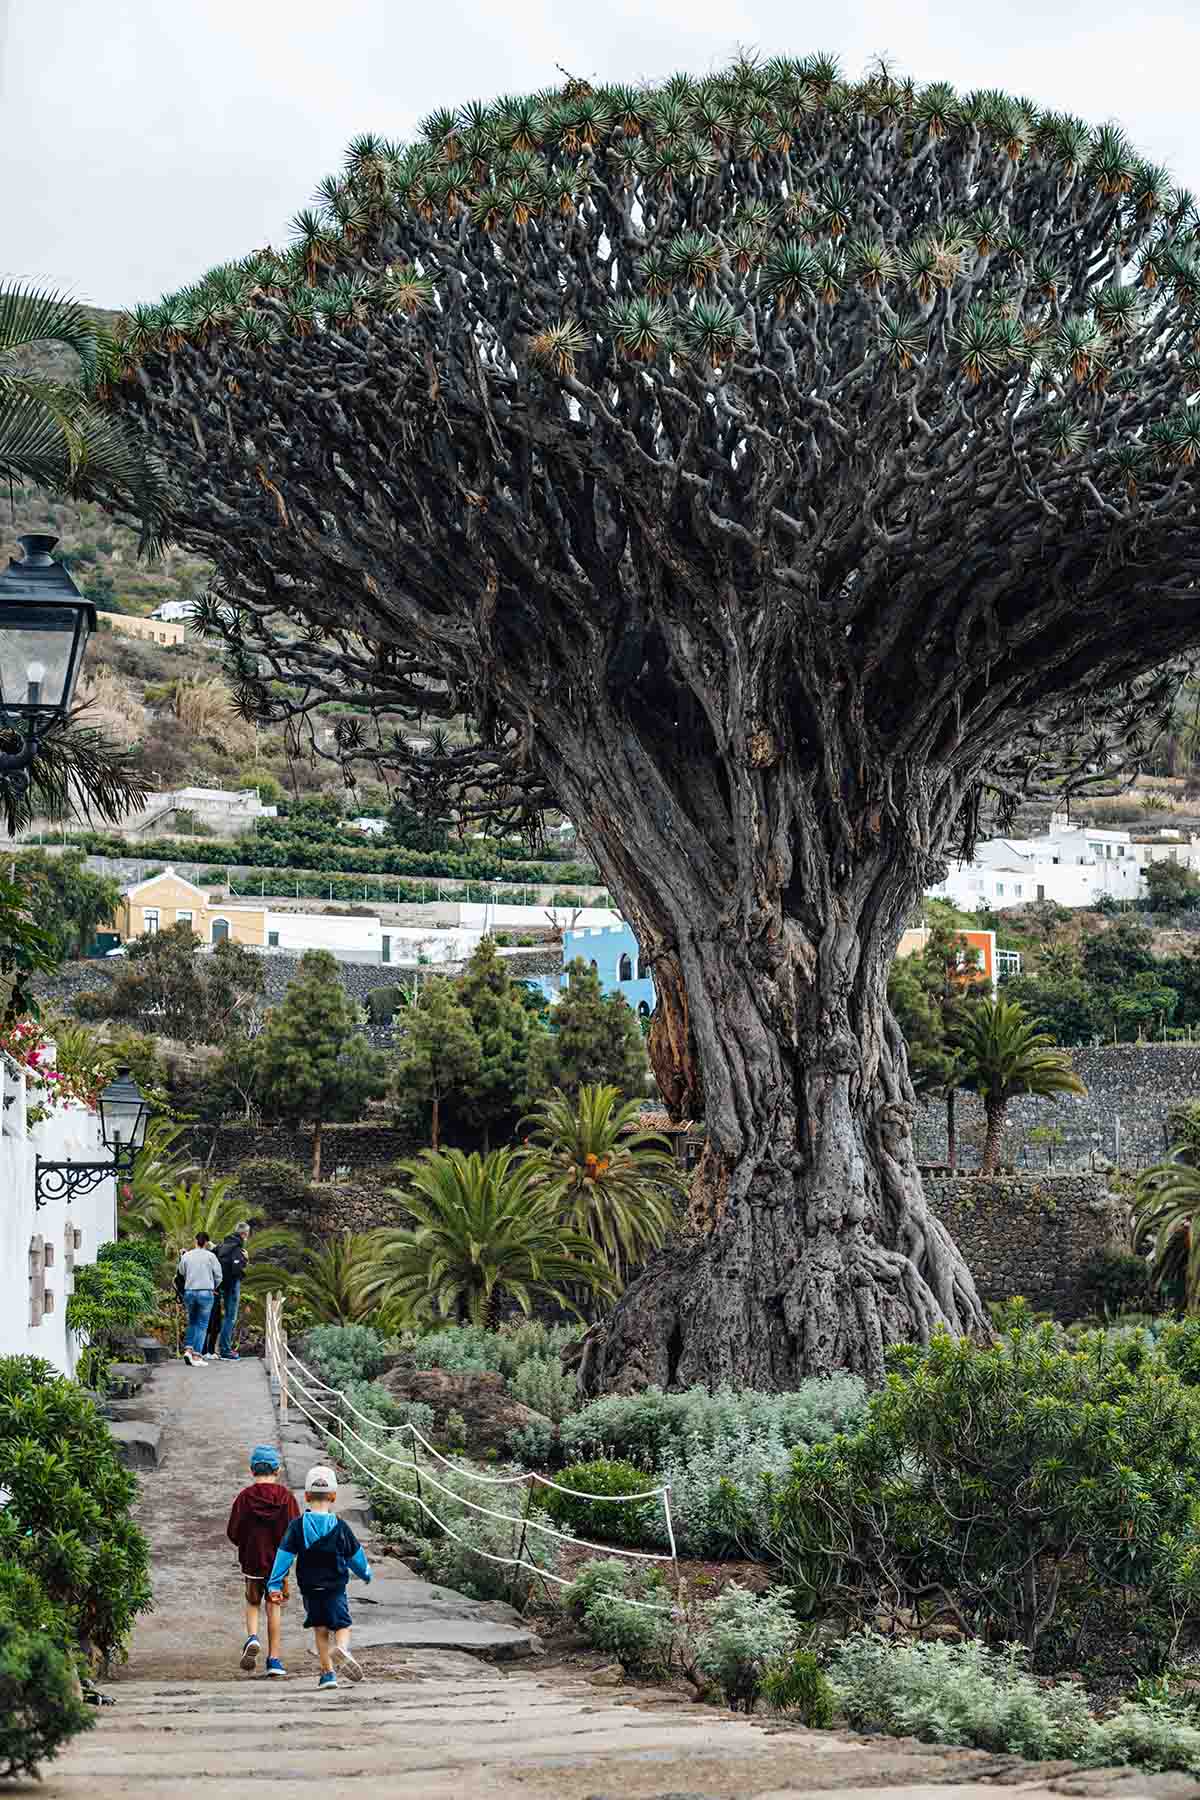 The oldest dragon tree in Tenerife